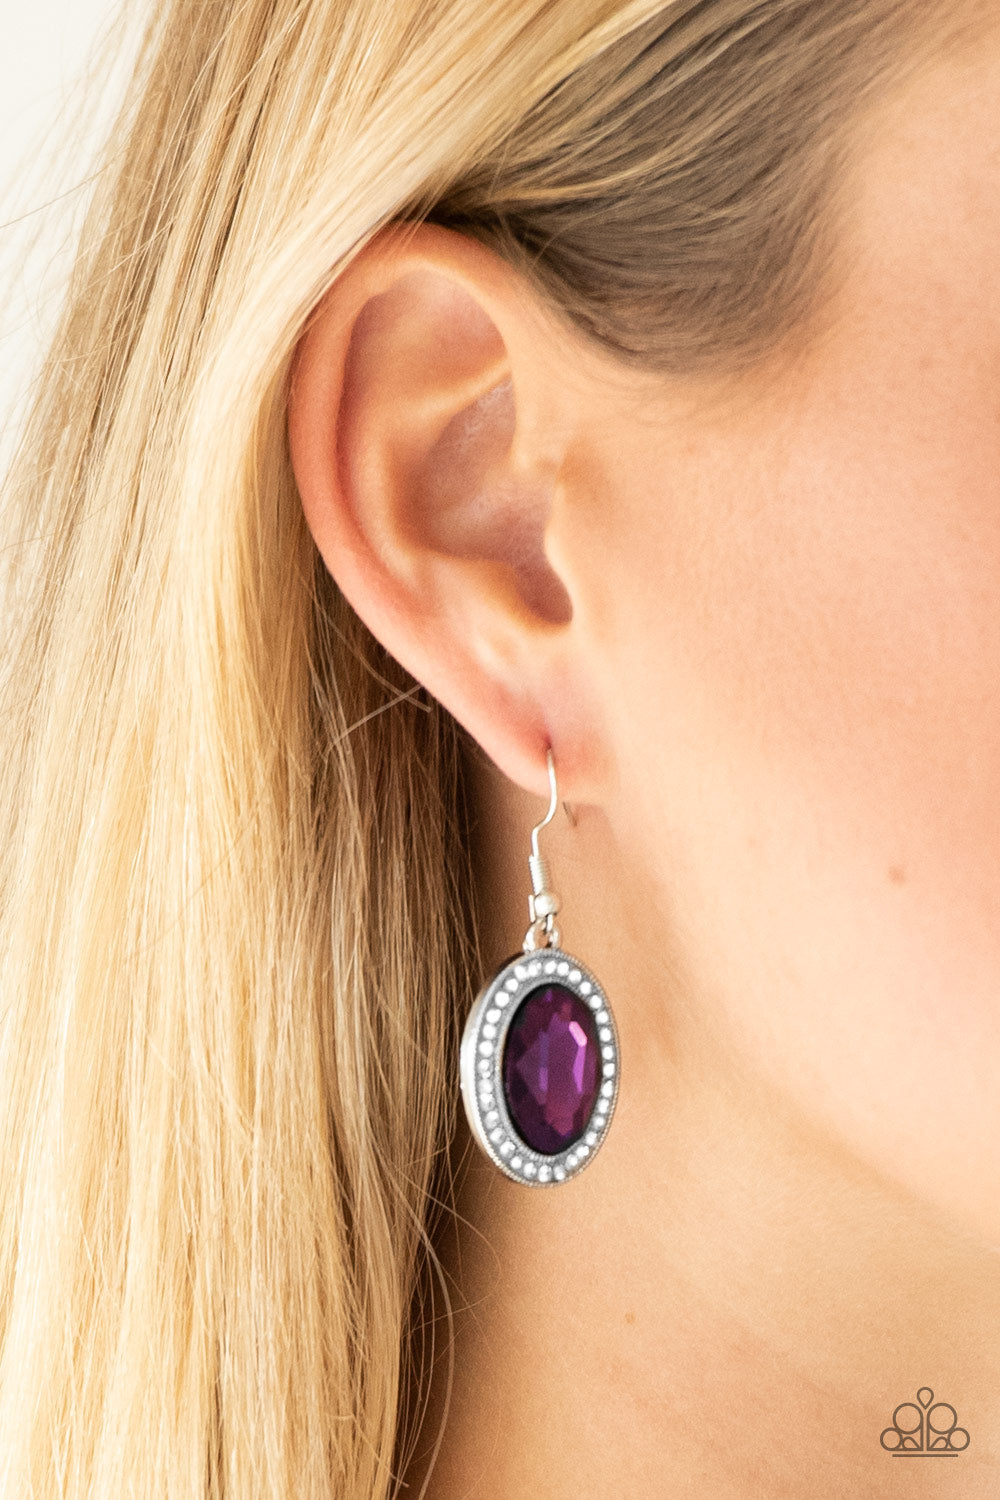 Paparazzi Only FAME In Town - Purple Gem - White Rhinestones - Earrings - $5 Jewelry with Ashley Swint